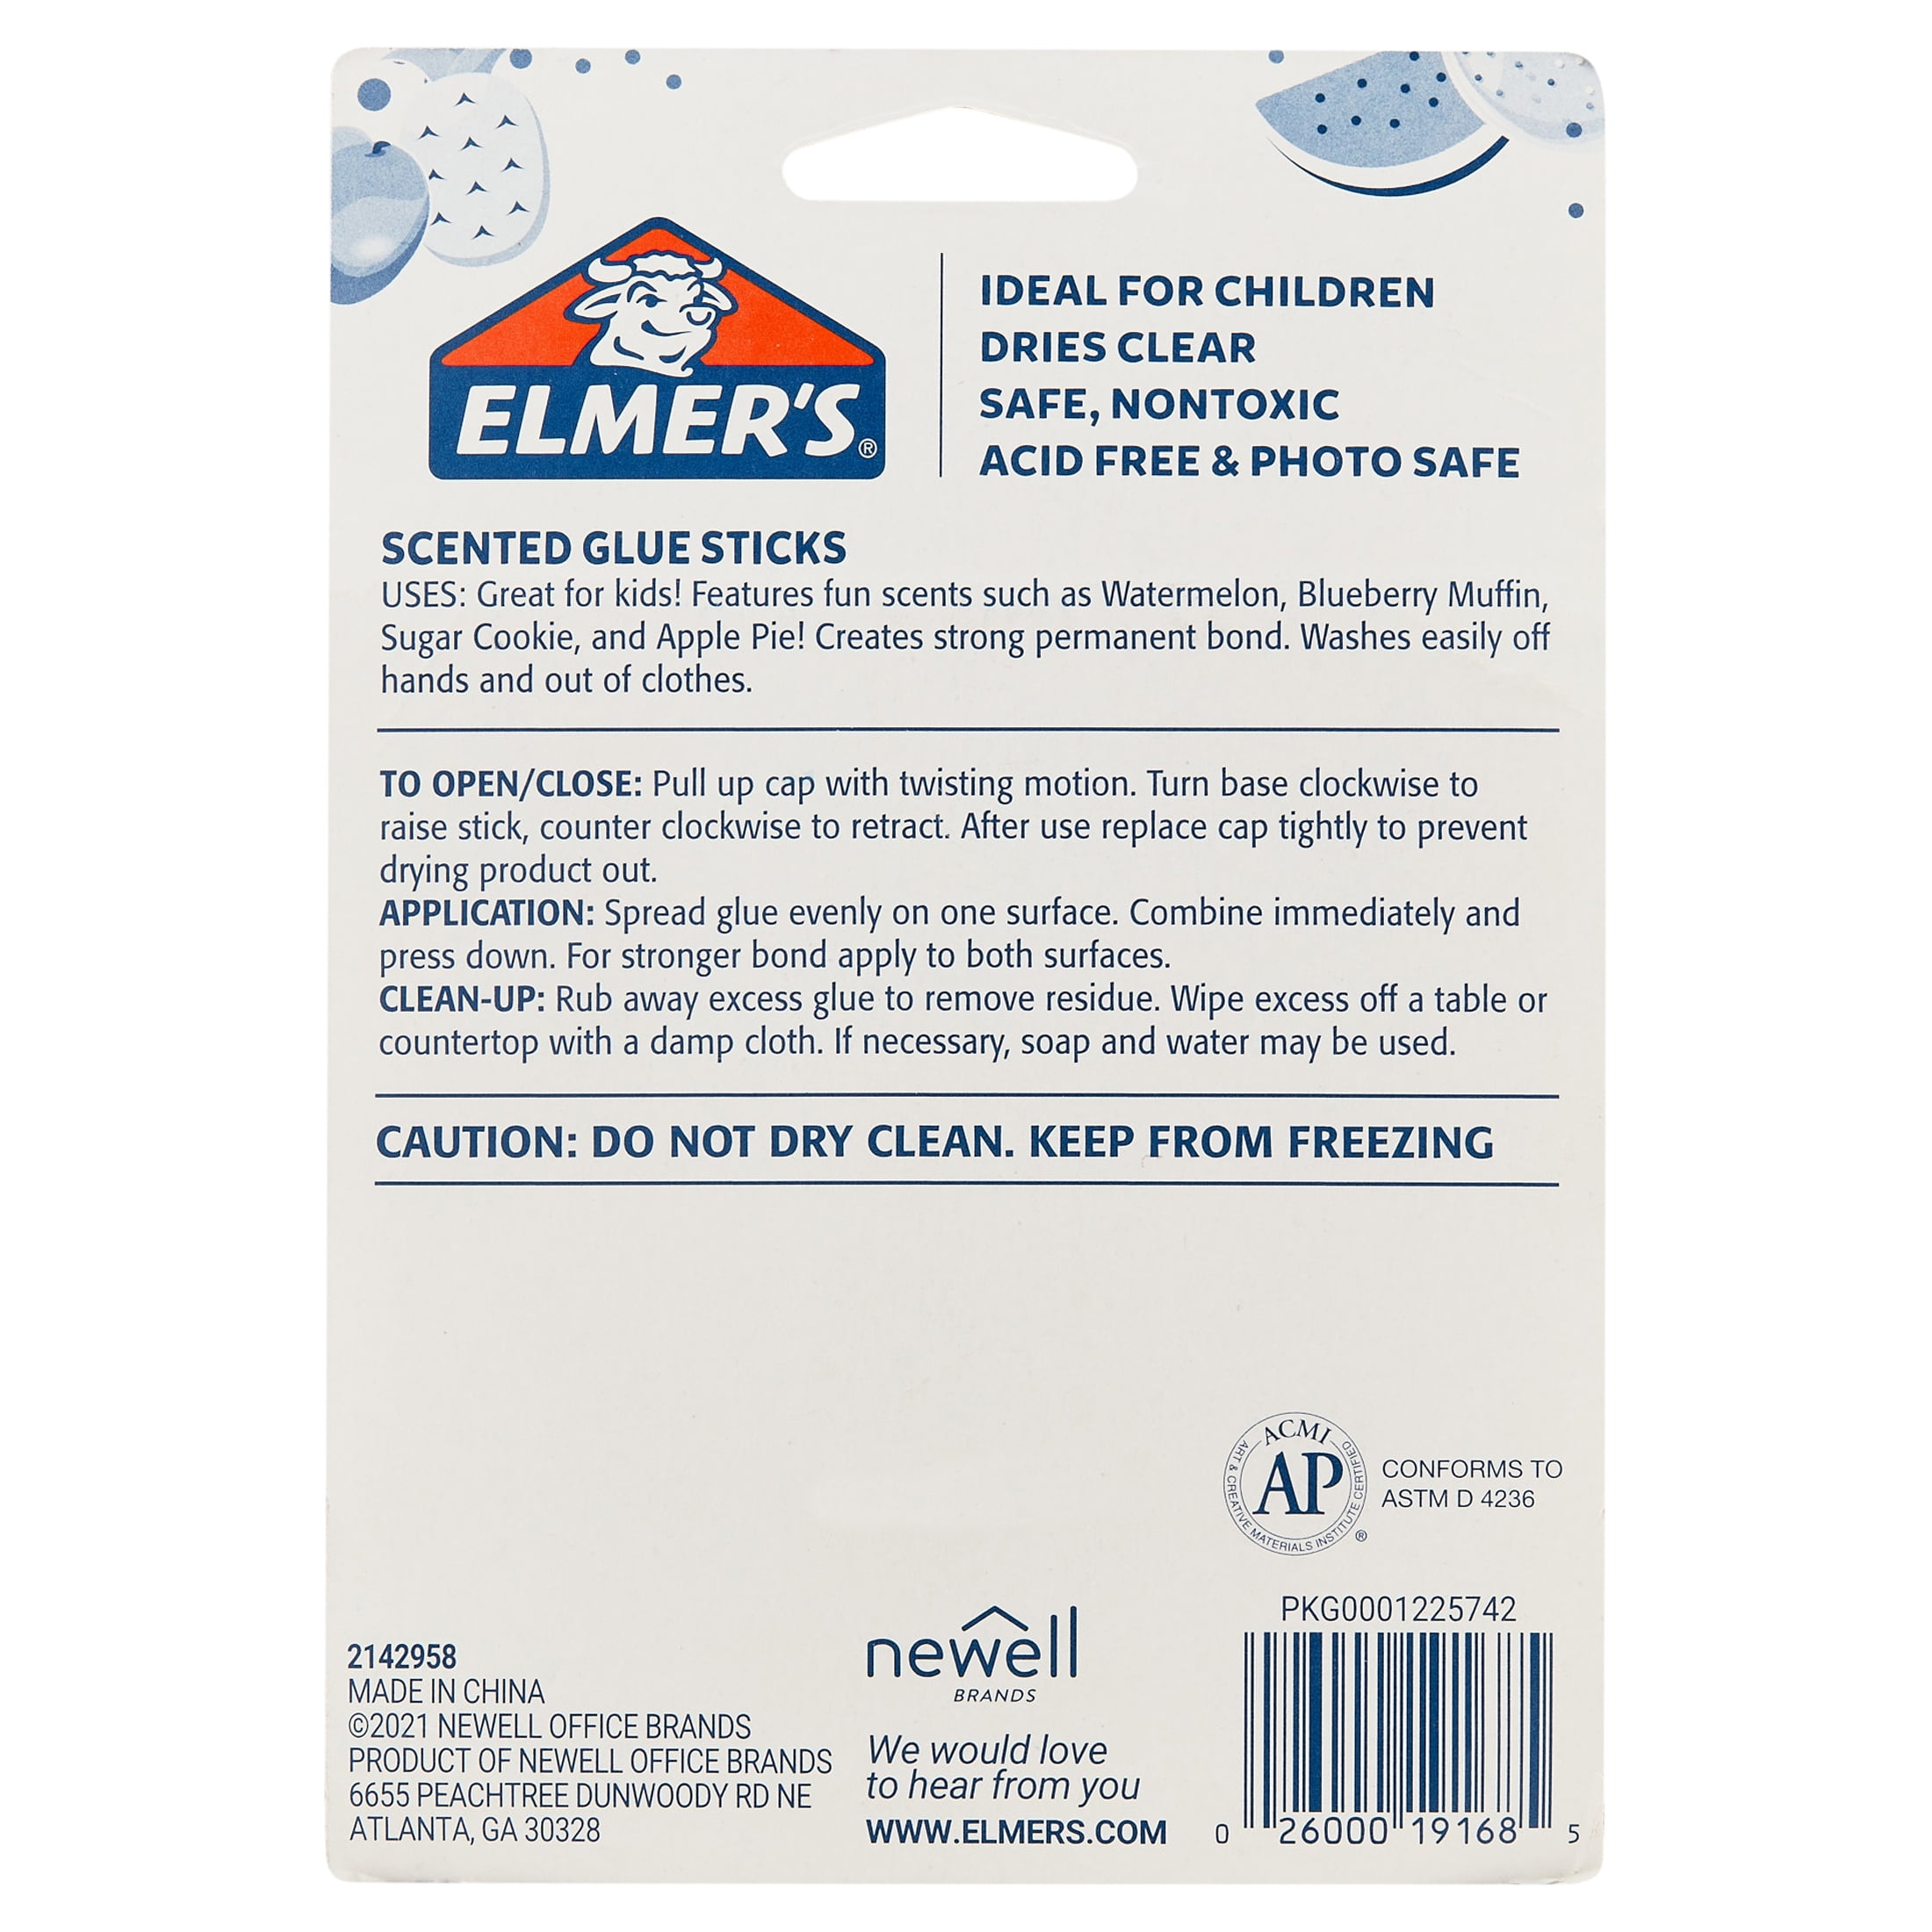 Elmer's Scented Clear Glue Sticks, Assorted Scents, Pack of 4